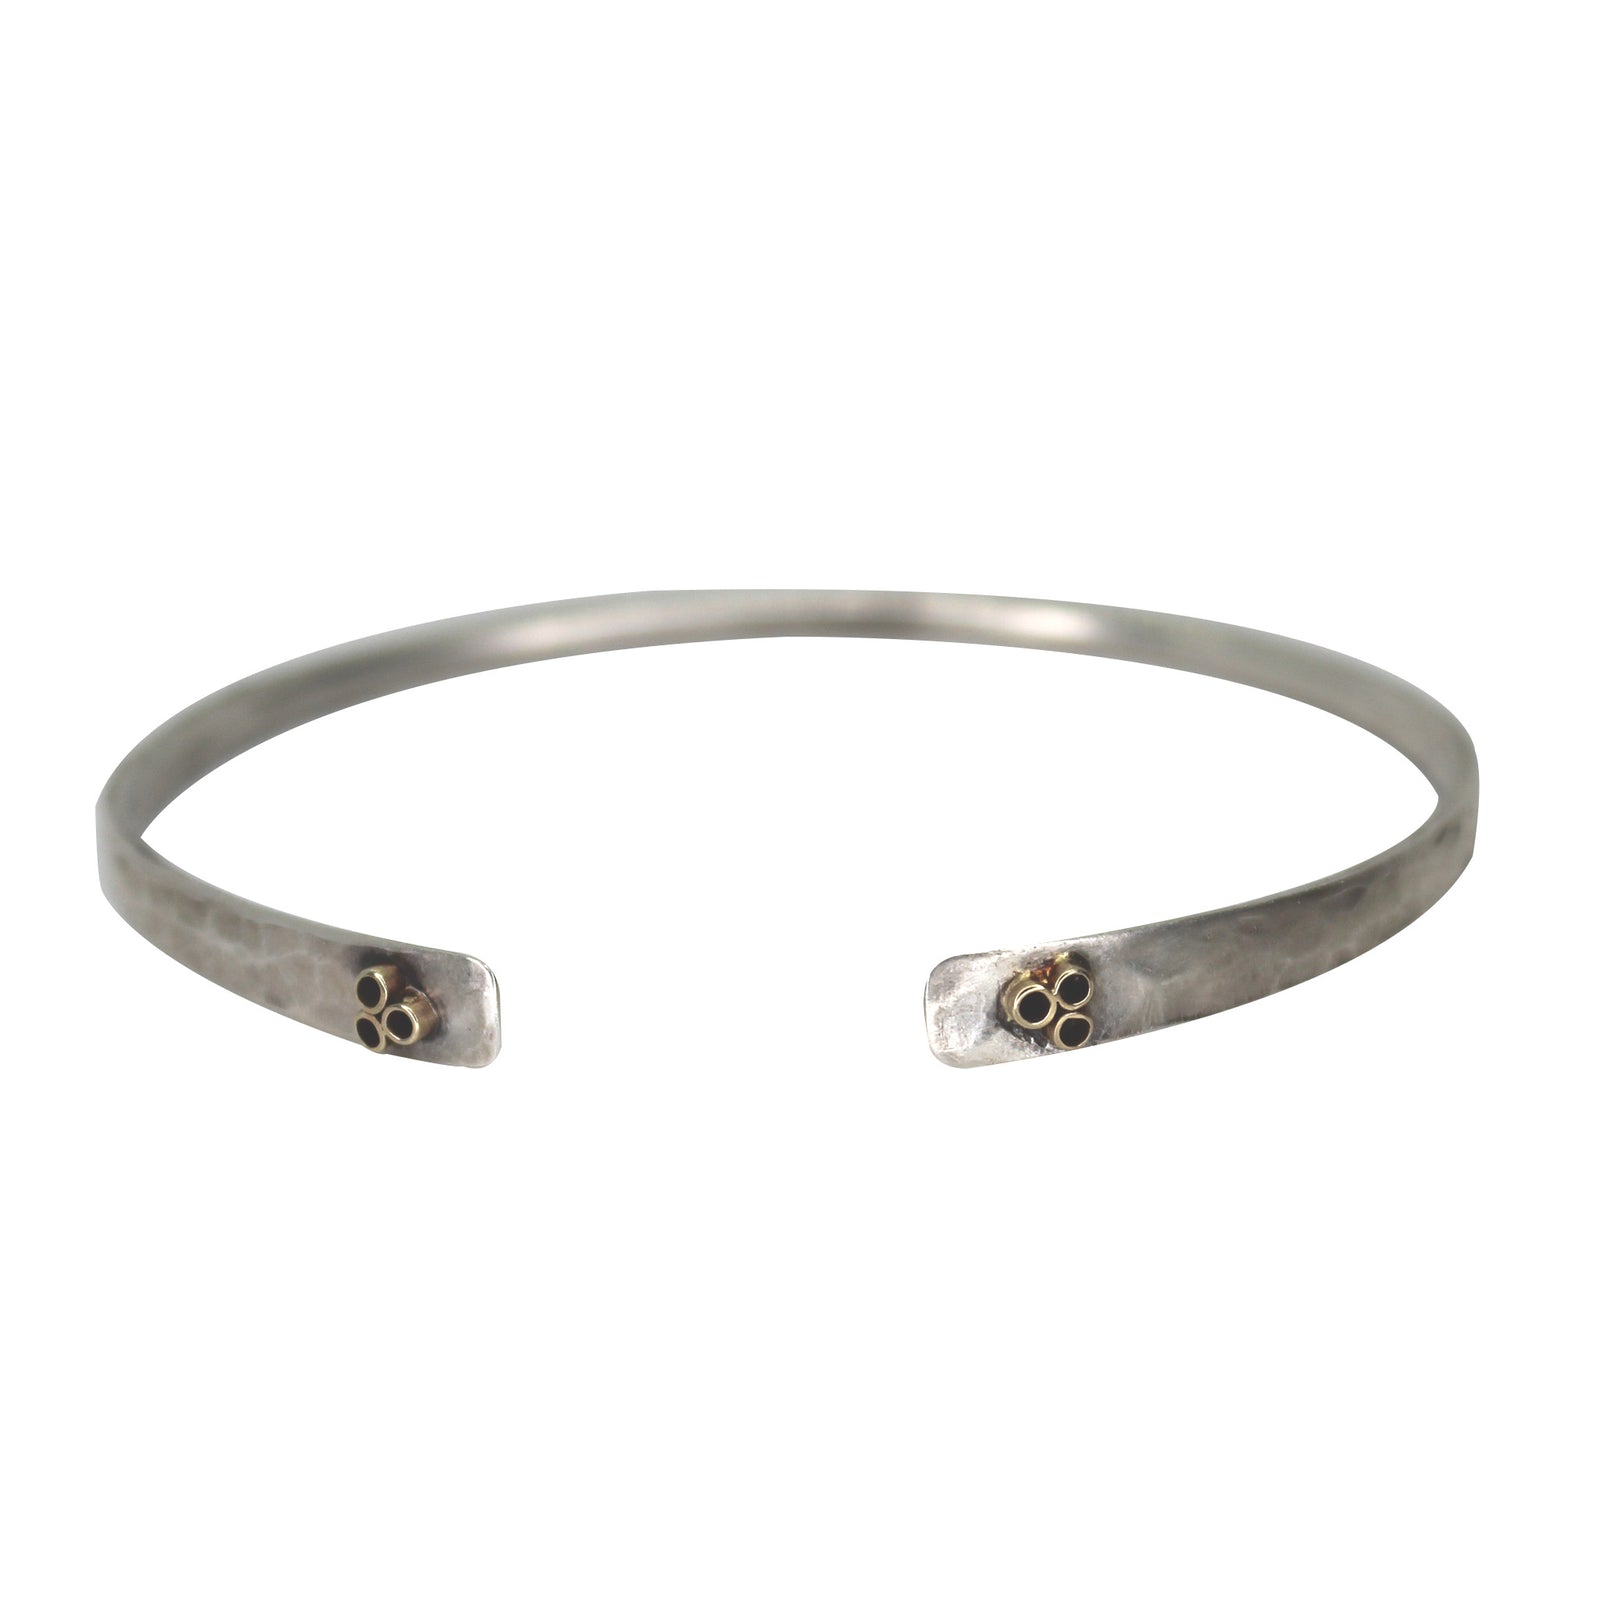 The Best Silver Bracelets for Men On Any Budget | Silveradda